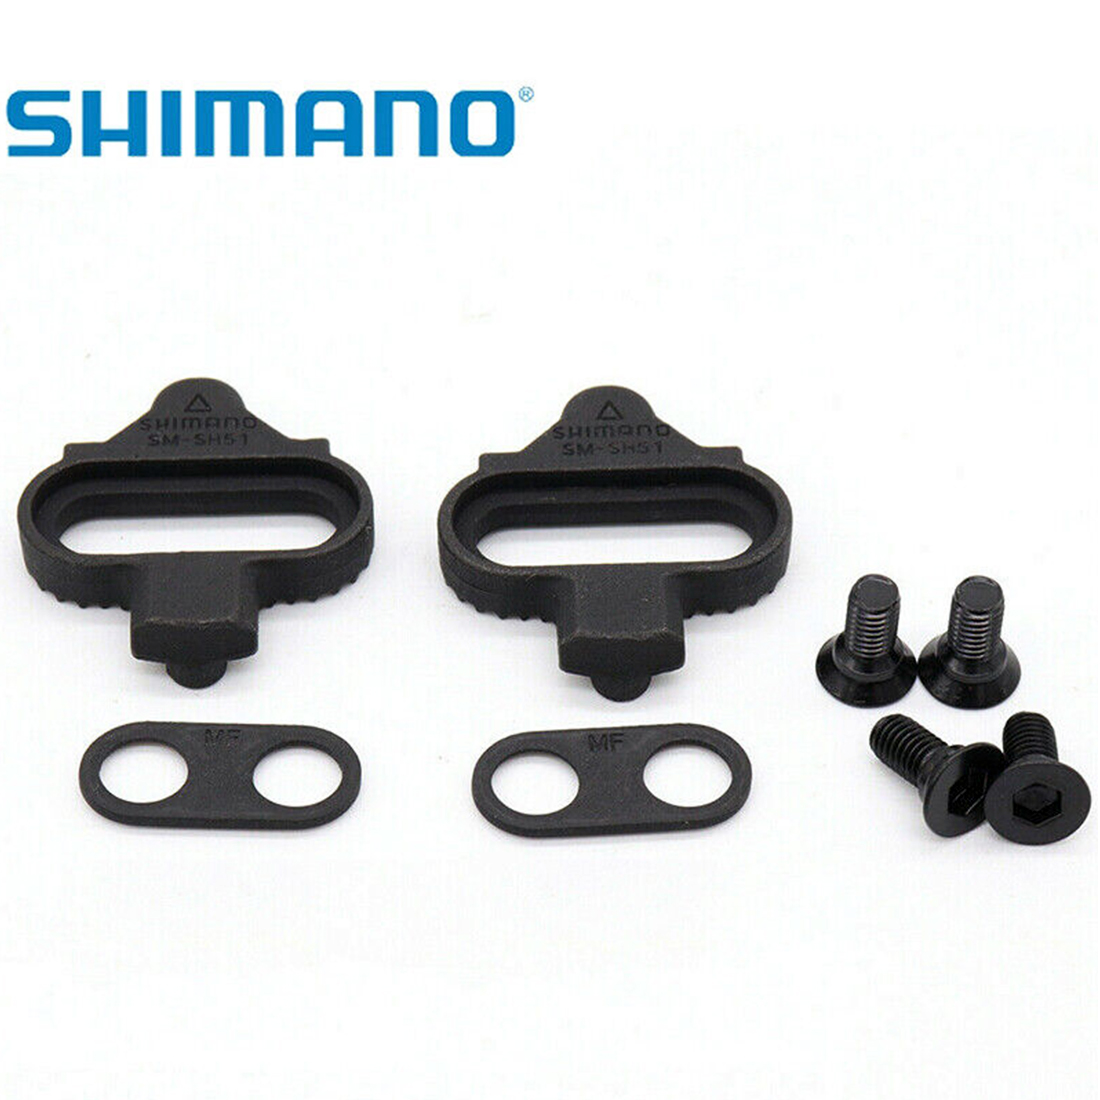 Shimano SPD SM-SH51/SH56 Cleat MTB Single-Directional Release Cleats w/o Plate Nuts - image 3 of 7